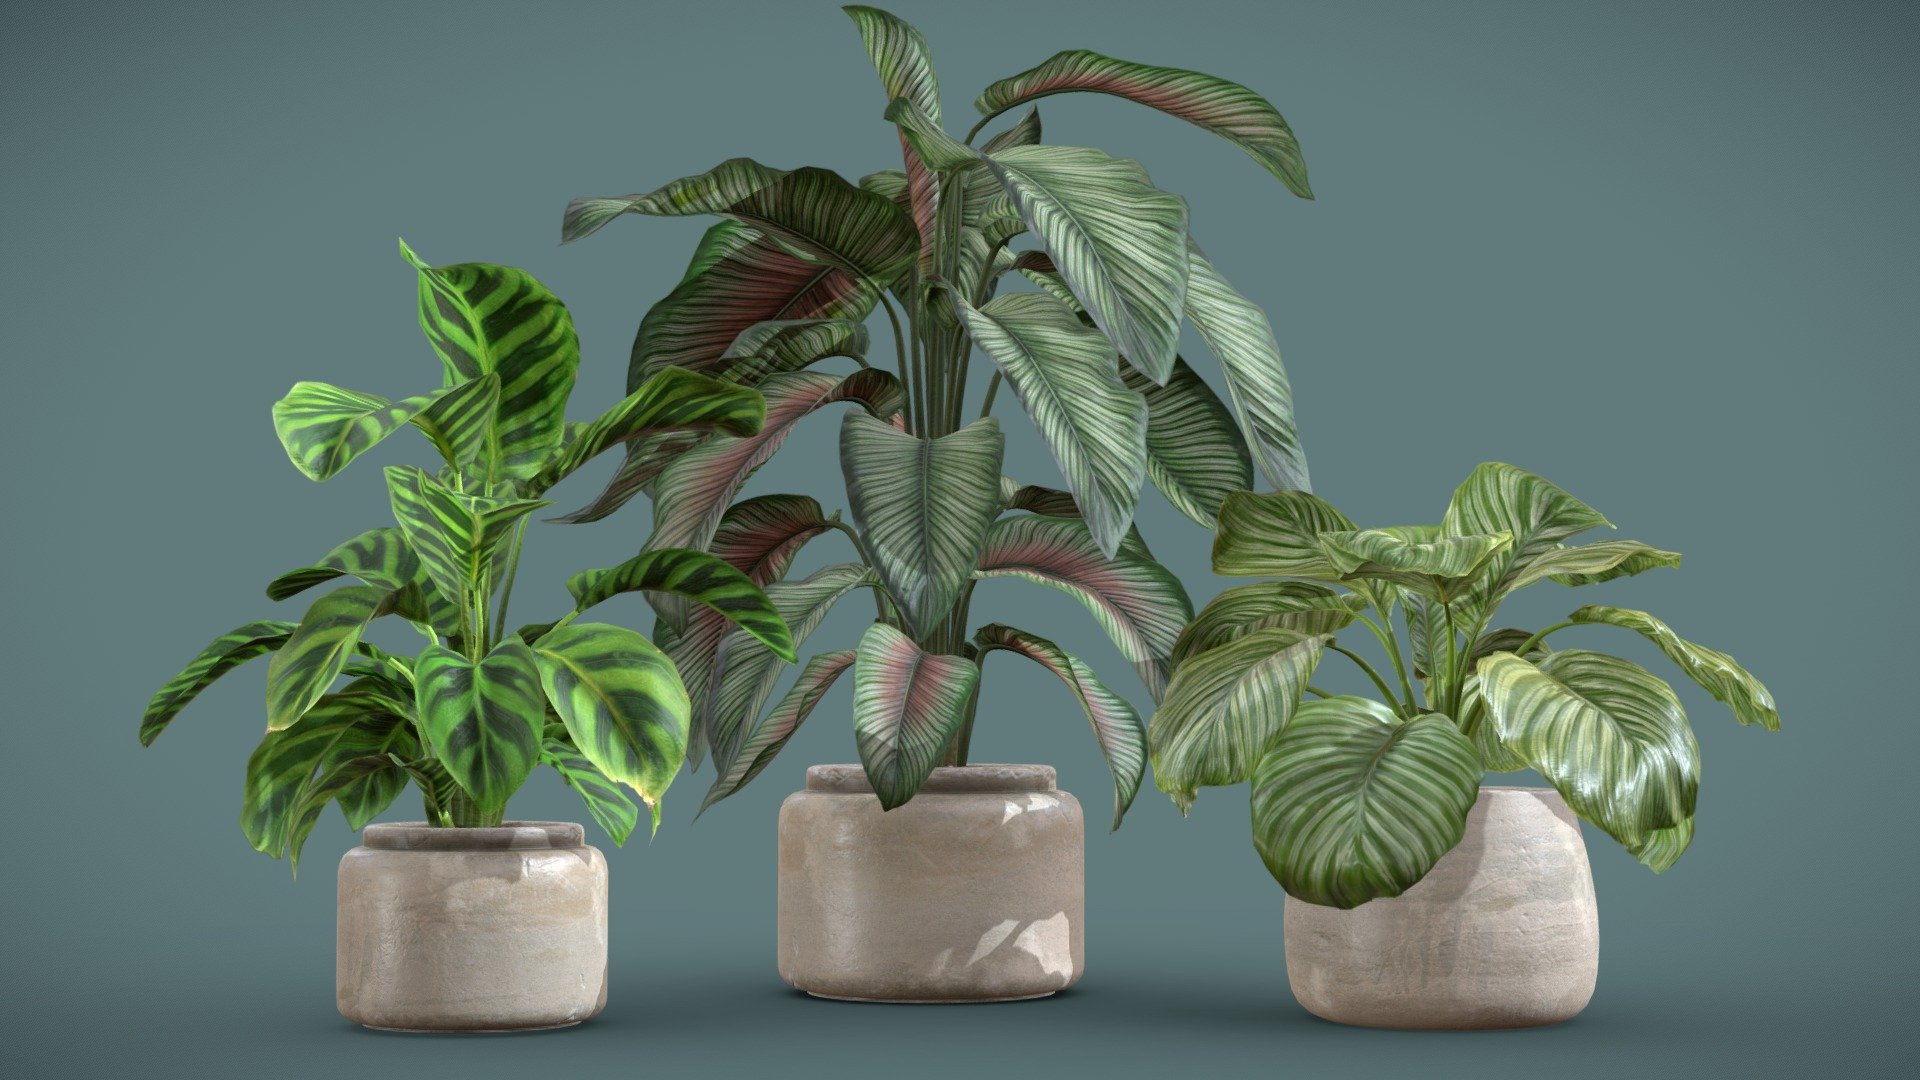 Calathea Plants Pack

This selection of Calathea plants will provide a nice touch to your interior renders. I kept the polycount relatively low but you can also subdivide the model if you need more definition.




Calathea Zebrina

Calathea Ornata

Calathea Orbifolia

4k Textures




Vertices  30 896

Polygons  30 842

Triangles 57 980
 - Calathea Plants Pack - Buy Royalty Free 3D model by AllQuad 3d model